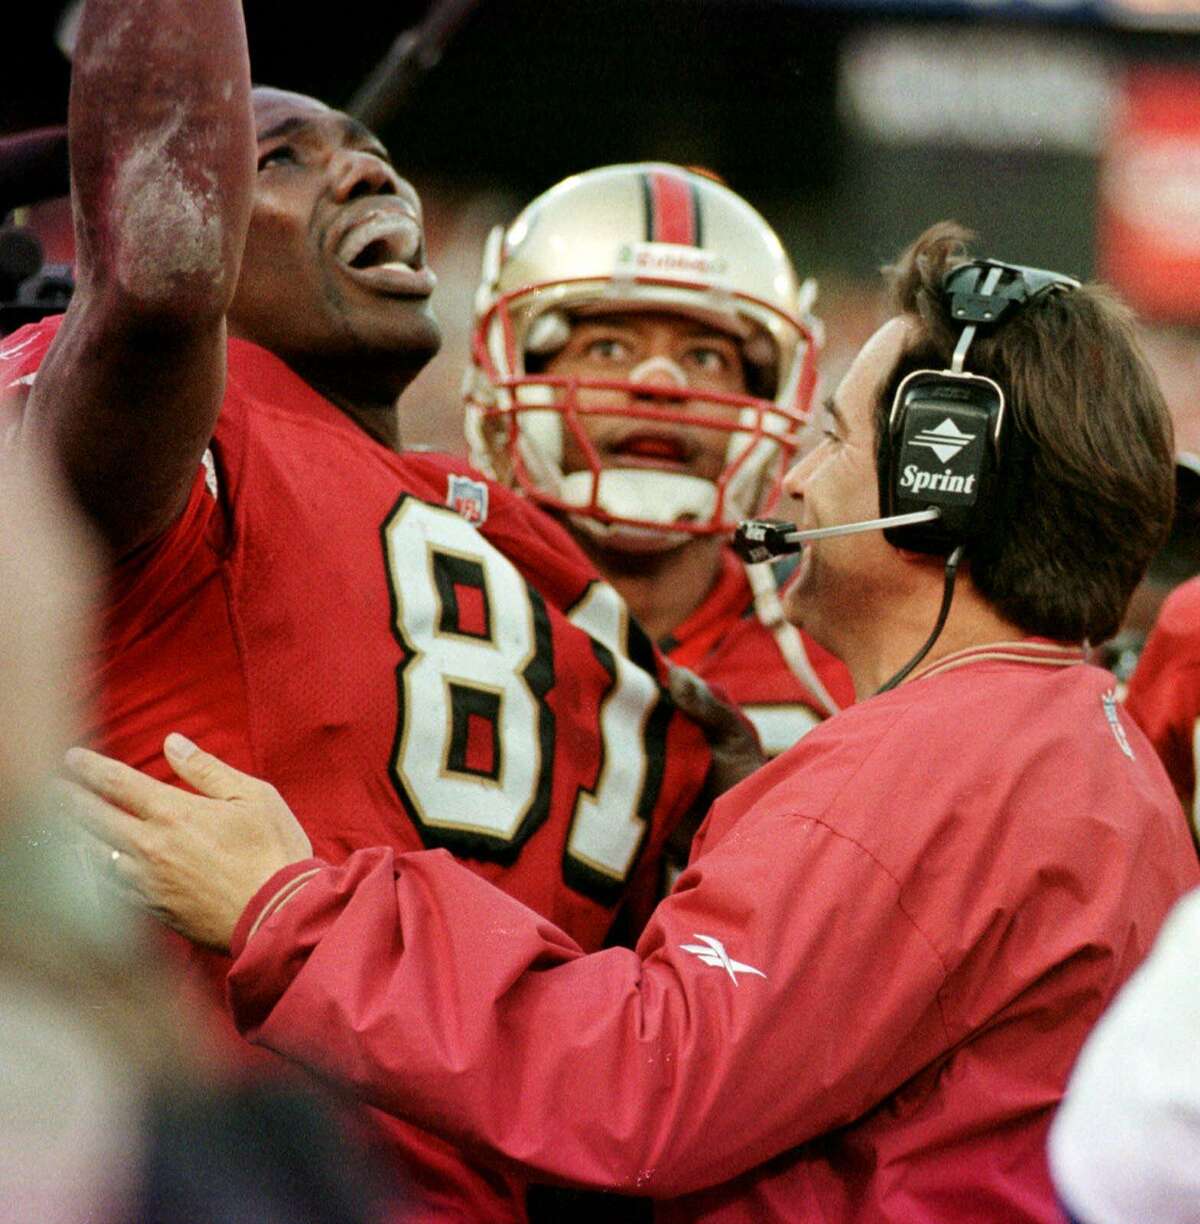 San Francisco 49ers' wide receiver Terrell Owens (81) is congratulated by head coach Steve Mariucci after catching the winning touchdown late in the fourth quarter of the NFC wild card playoff game at 3COM Park in San Francisco, Sunday, Jan. 3, 1999. The 49ers defeated the Green Bay Packers 30-27. Player in background is unidentified. (AP Photo/Ben Margot)